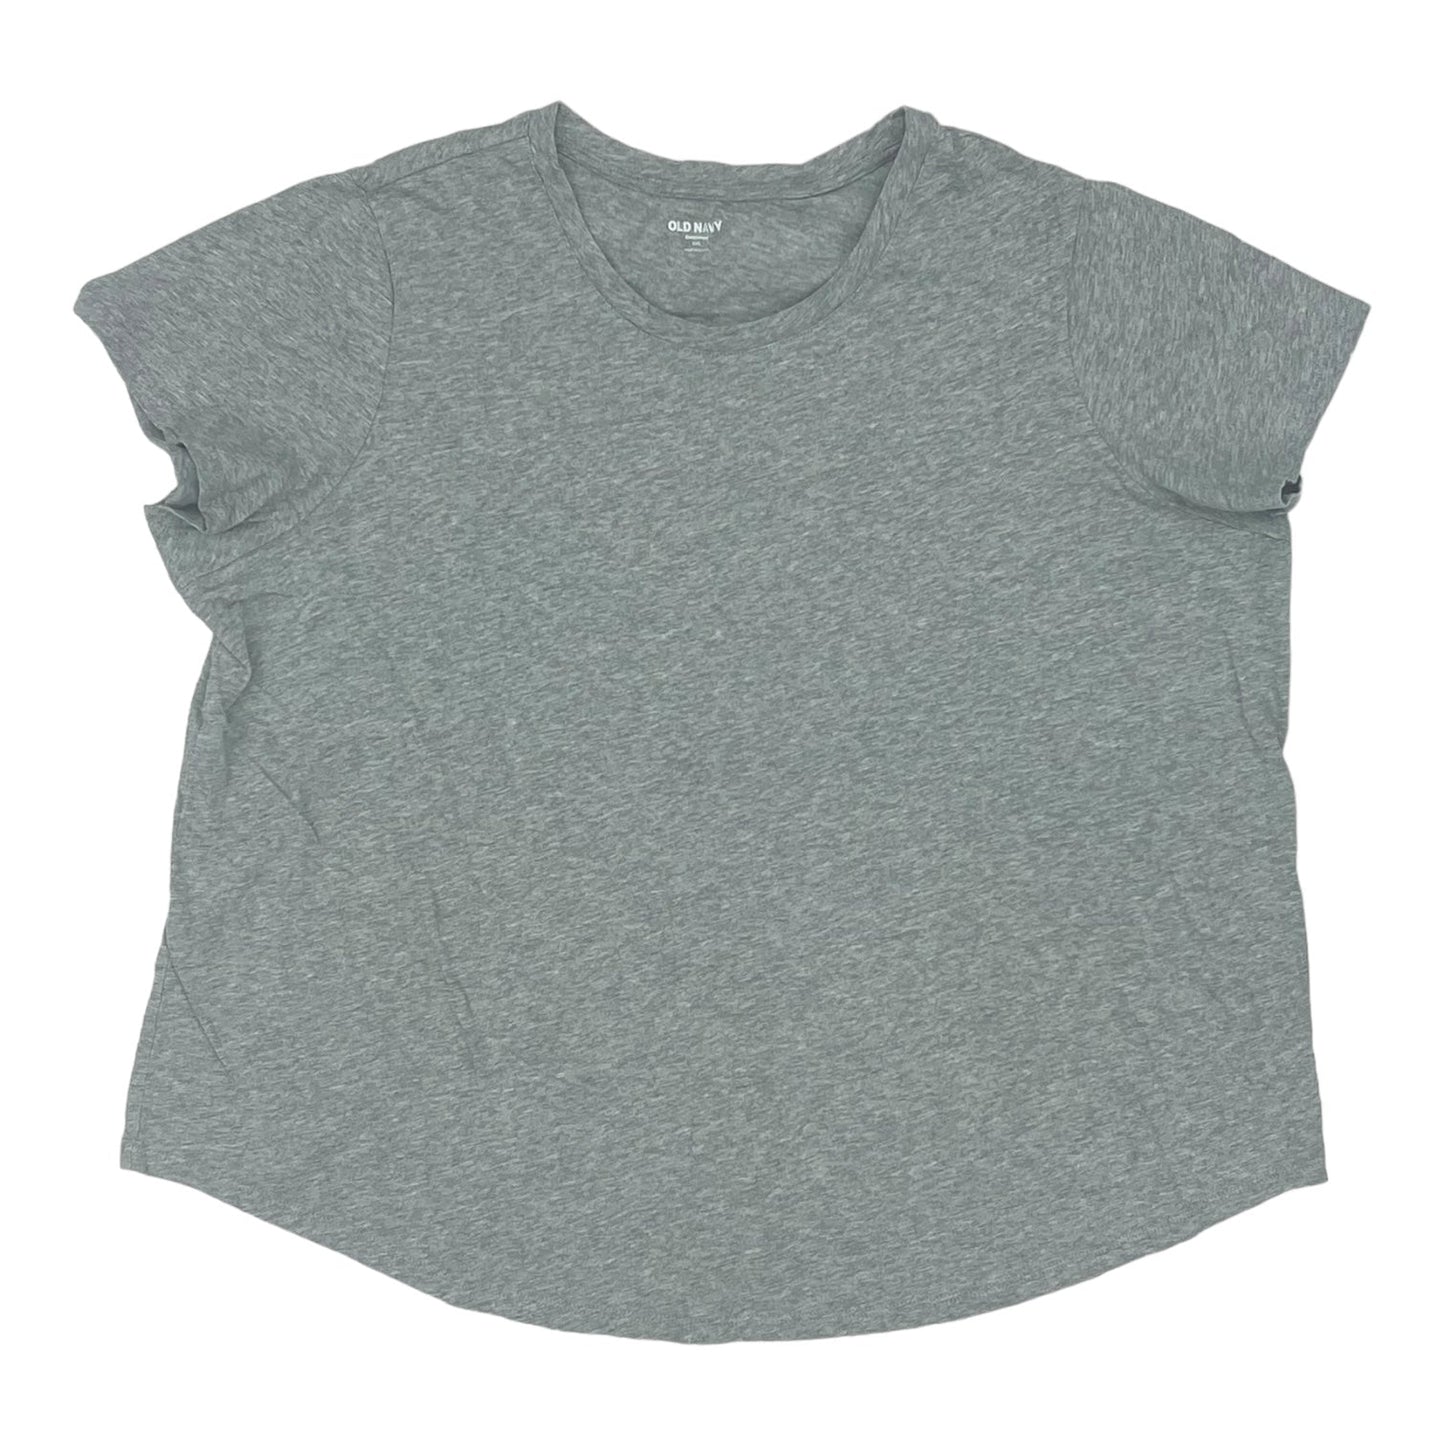 GREY OLD NAVY TOP SS BASIC, Size 2X